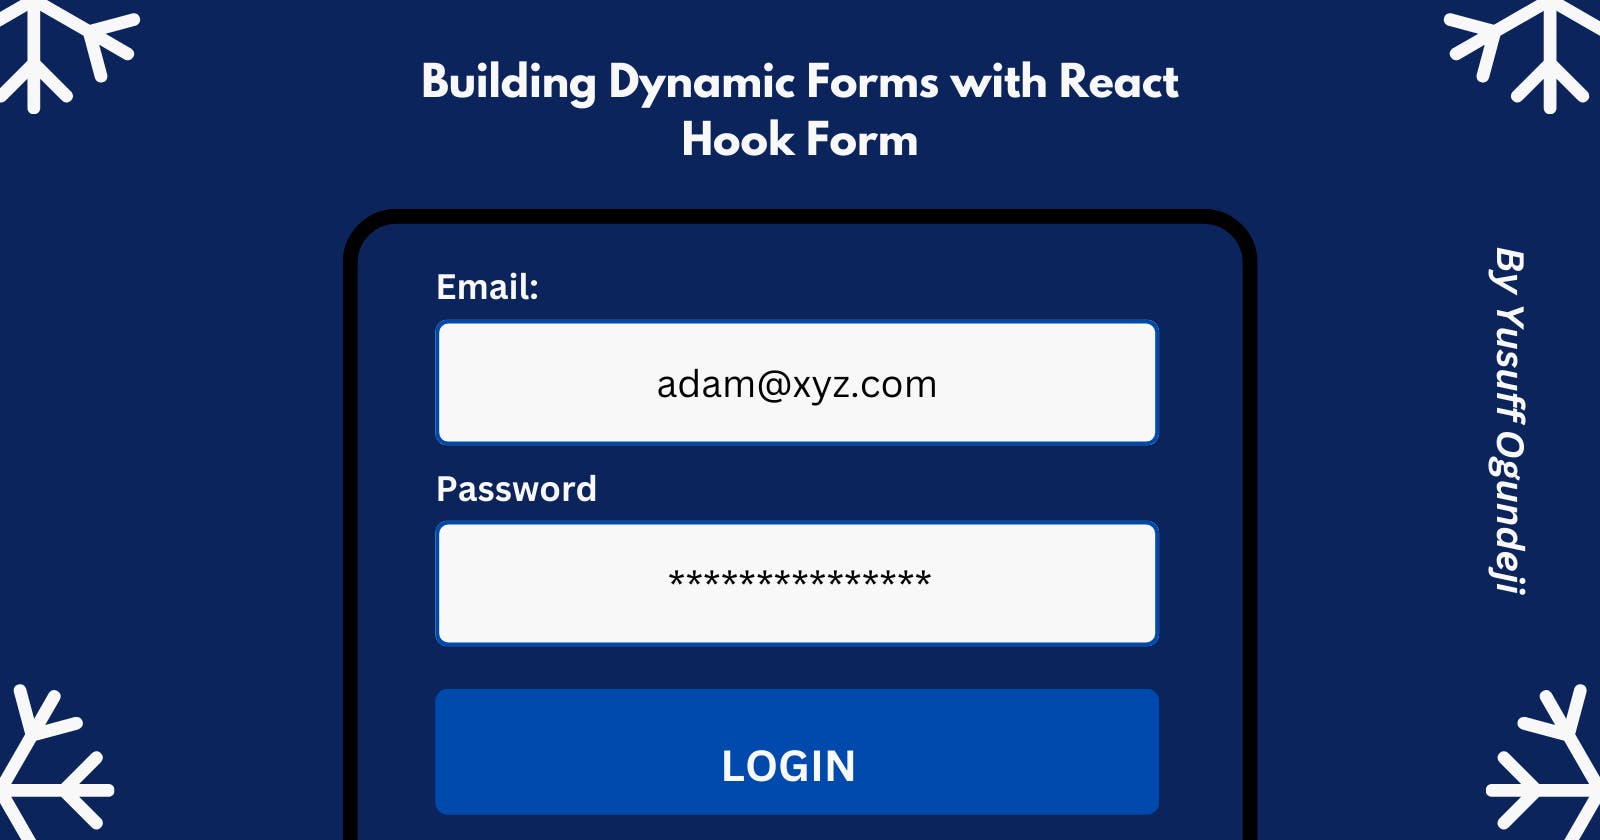 Building Dynamic Forms with React Hook Form